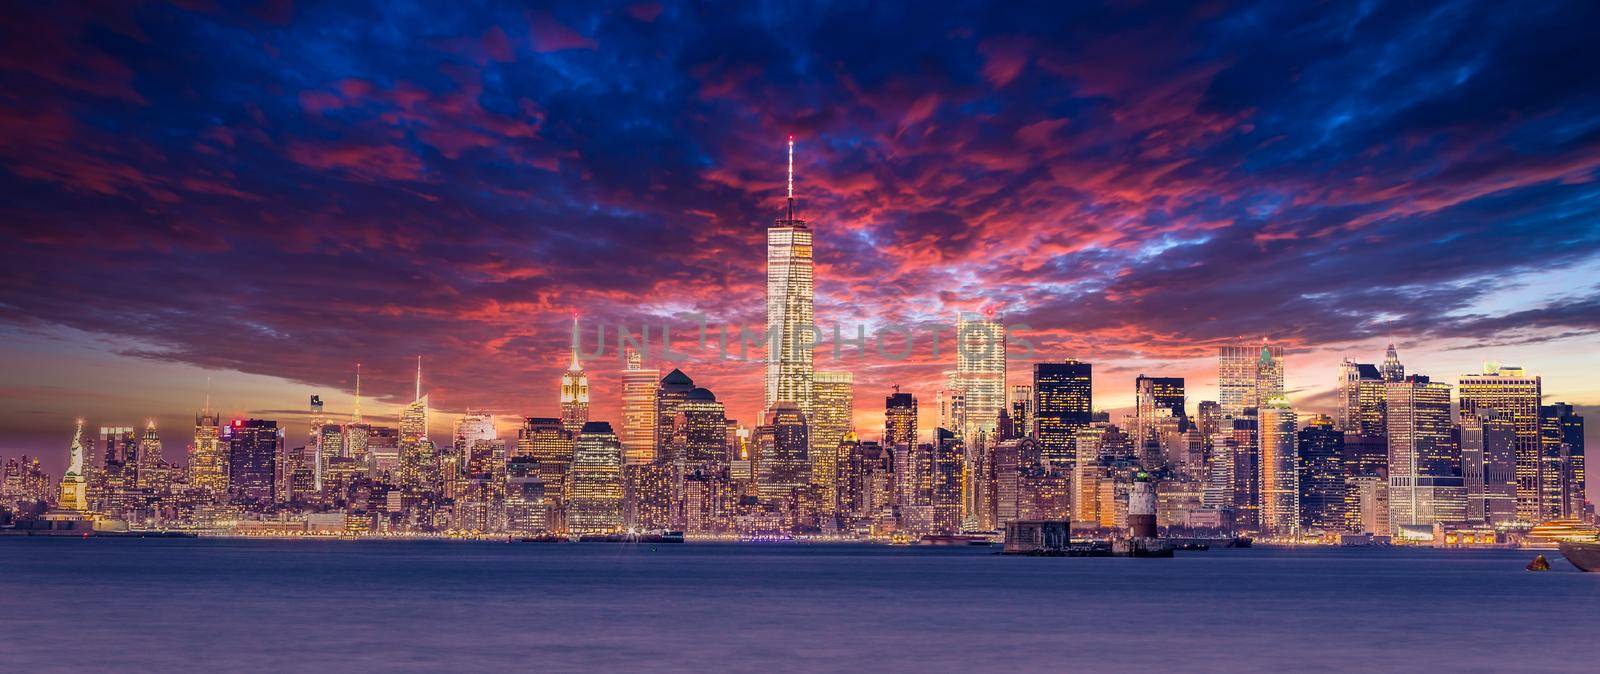 New York City Manhattan downtown skyline at dusk with skyscrapers illuminated over Hudson River panorama. Dramatic sunset sky. by kasto